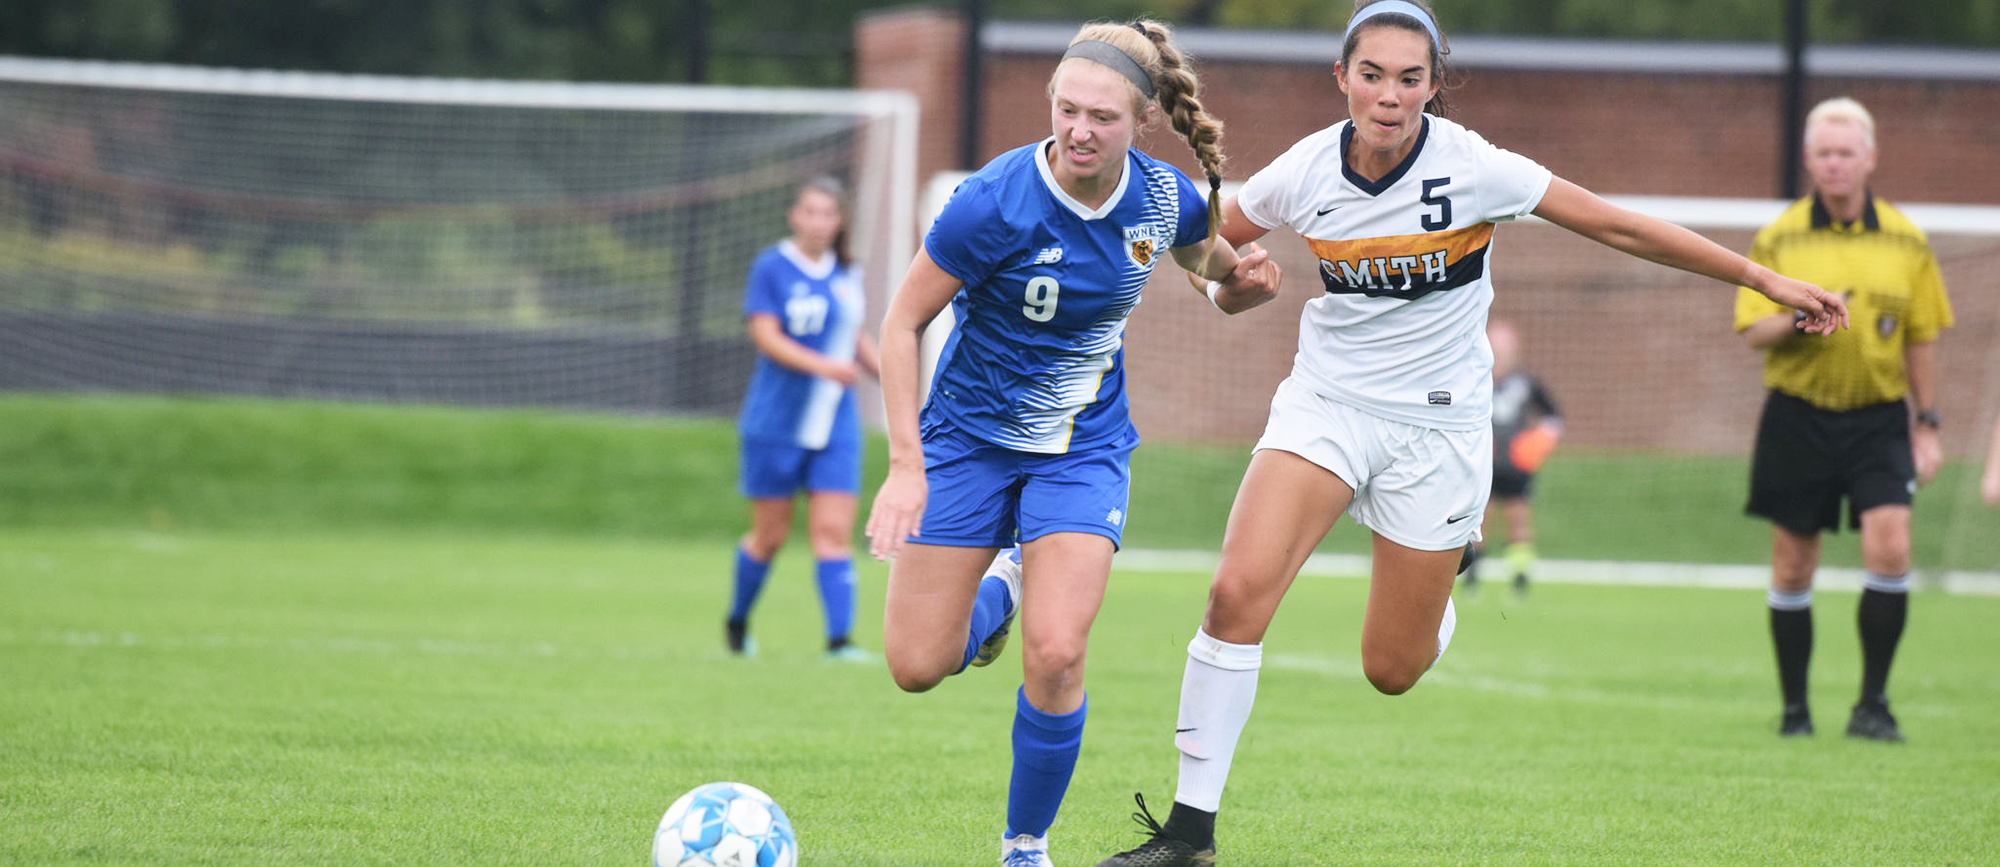 Sophomore Christina Sordi scored her second goal of the season late in regulation as WNE rallied to earn a 1-1 draw at Roger Williams on Tuesday night. (Photo by Rachael Margossian)